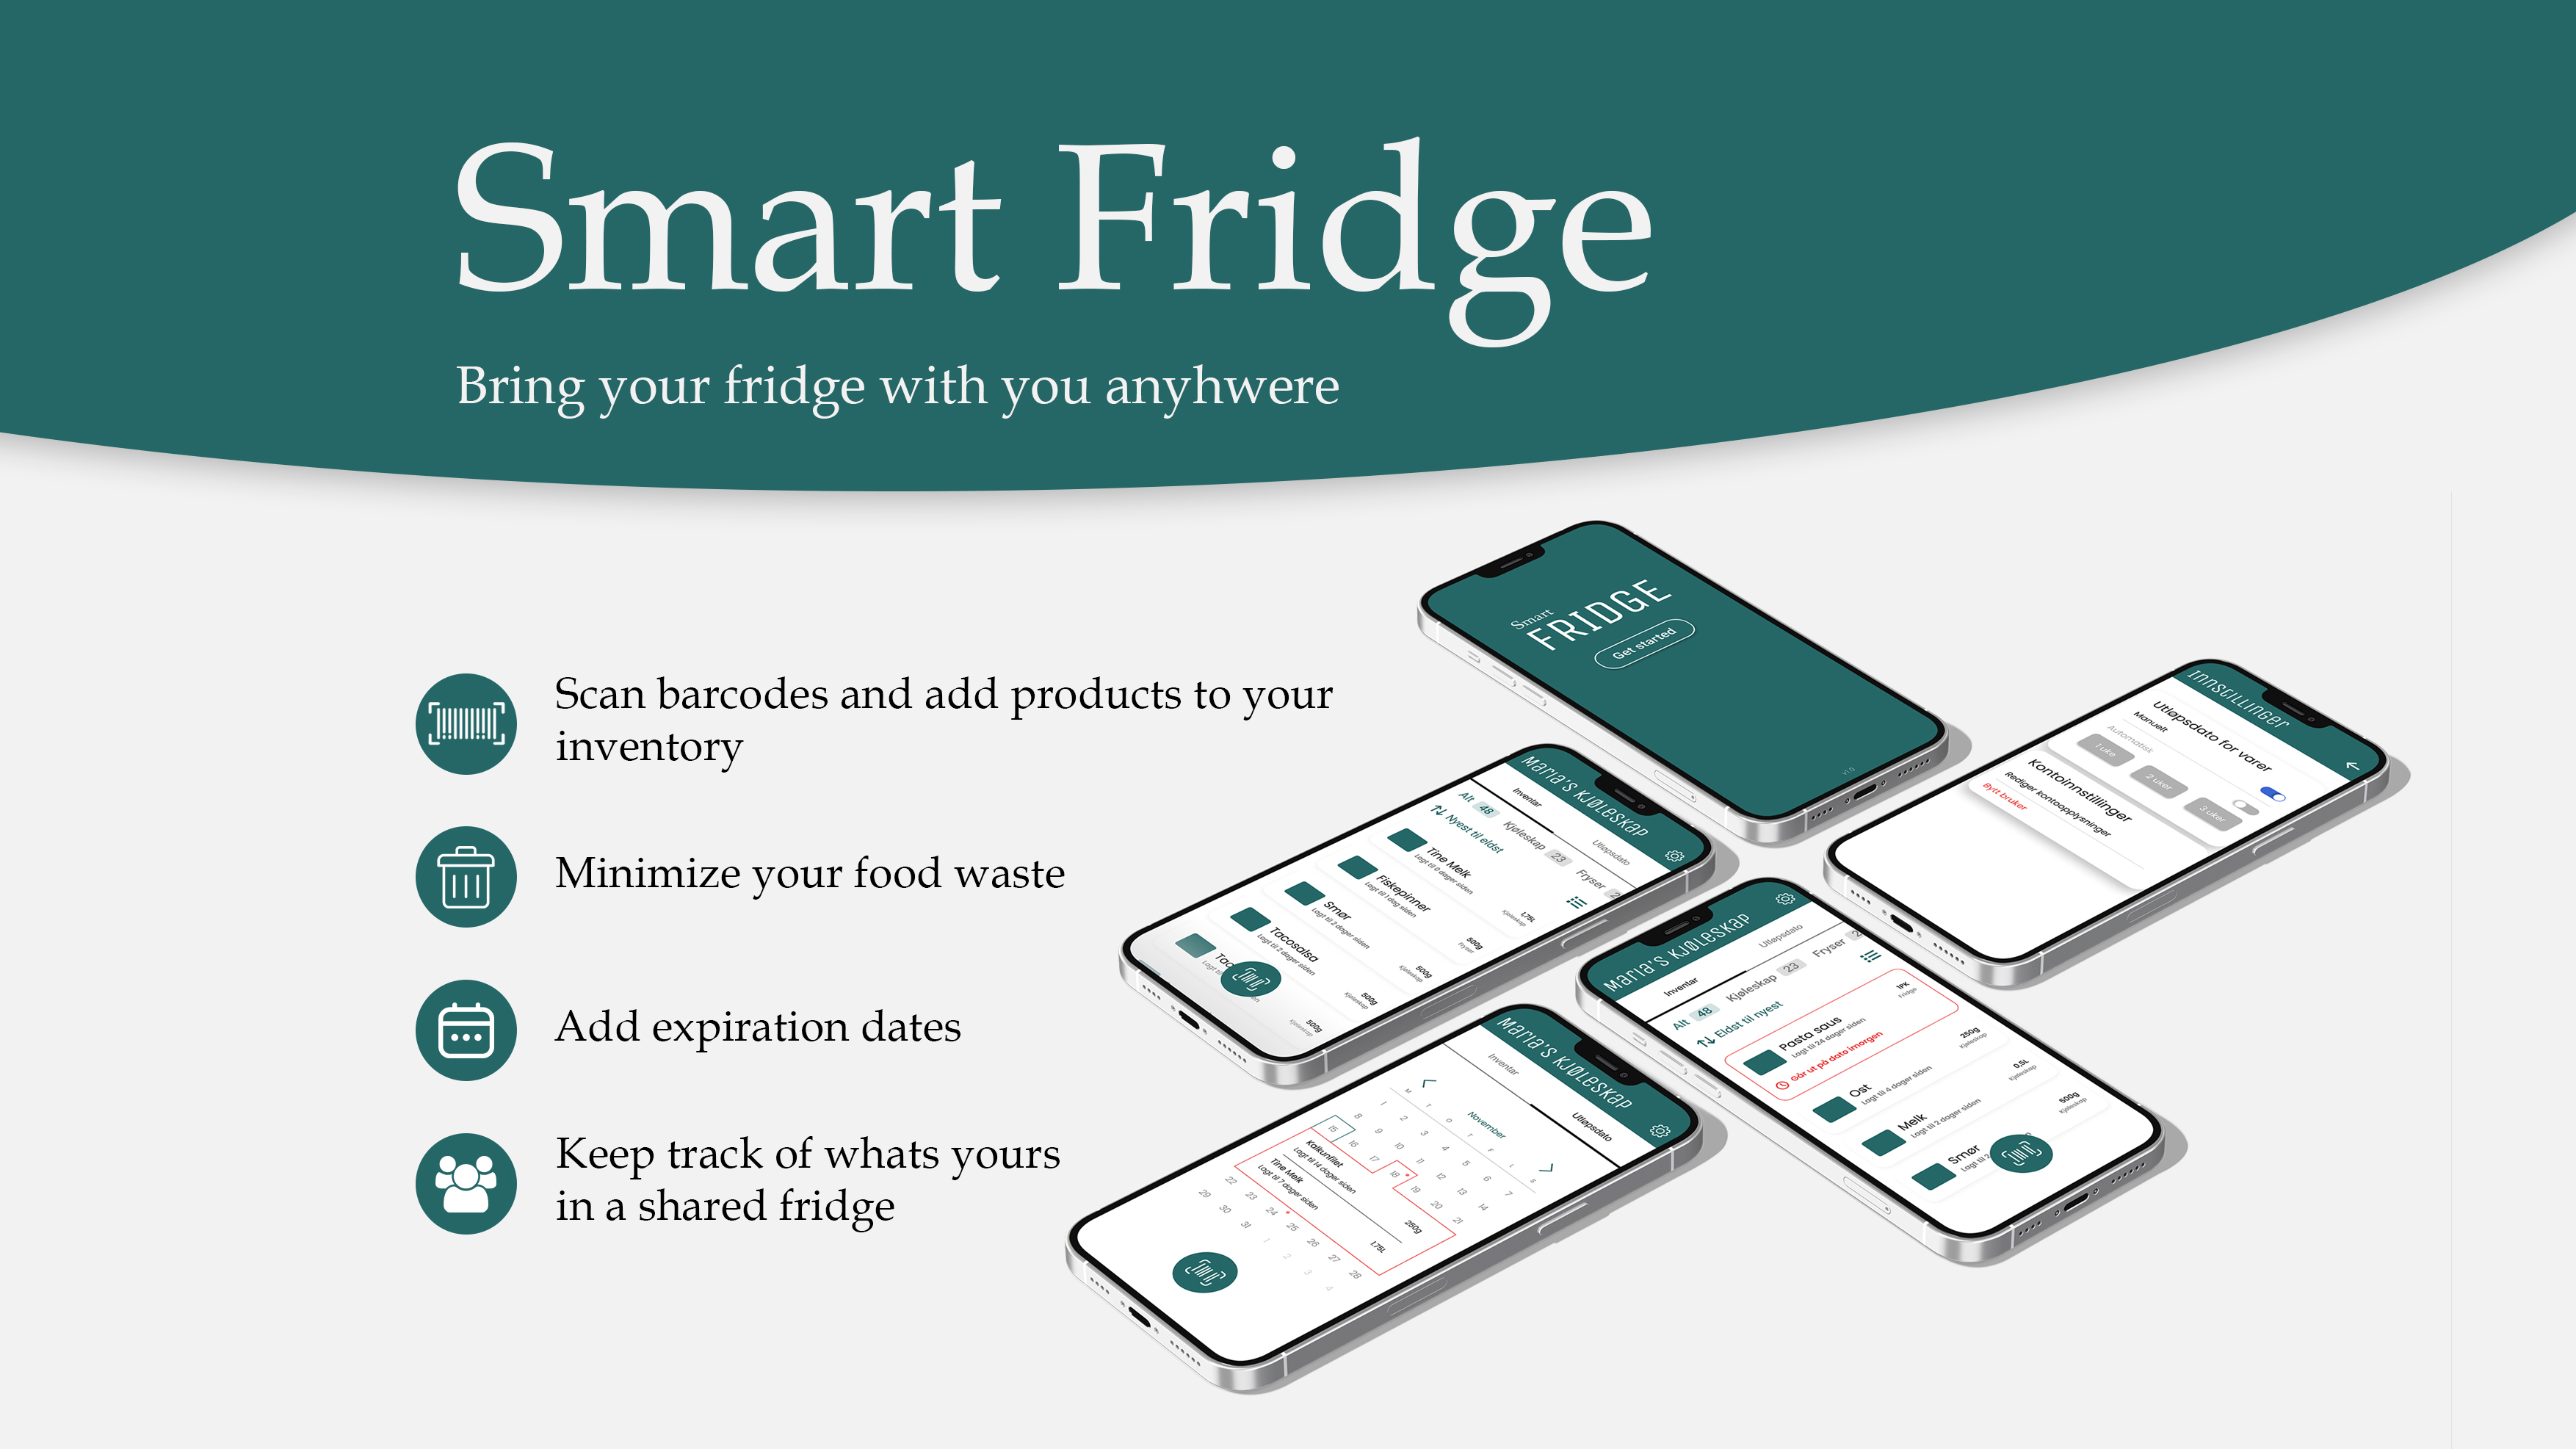 Image of my first project Smart Fridge